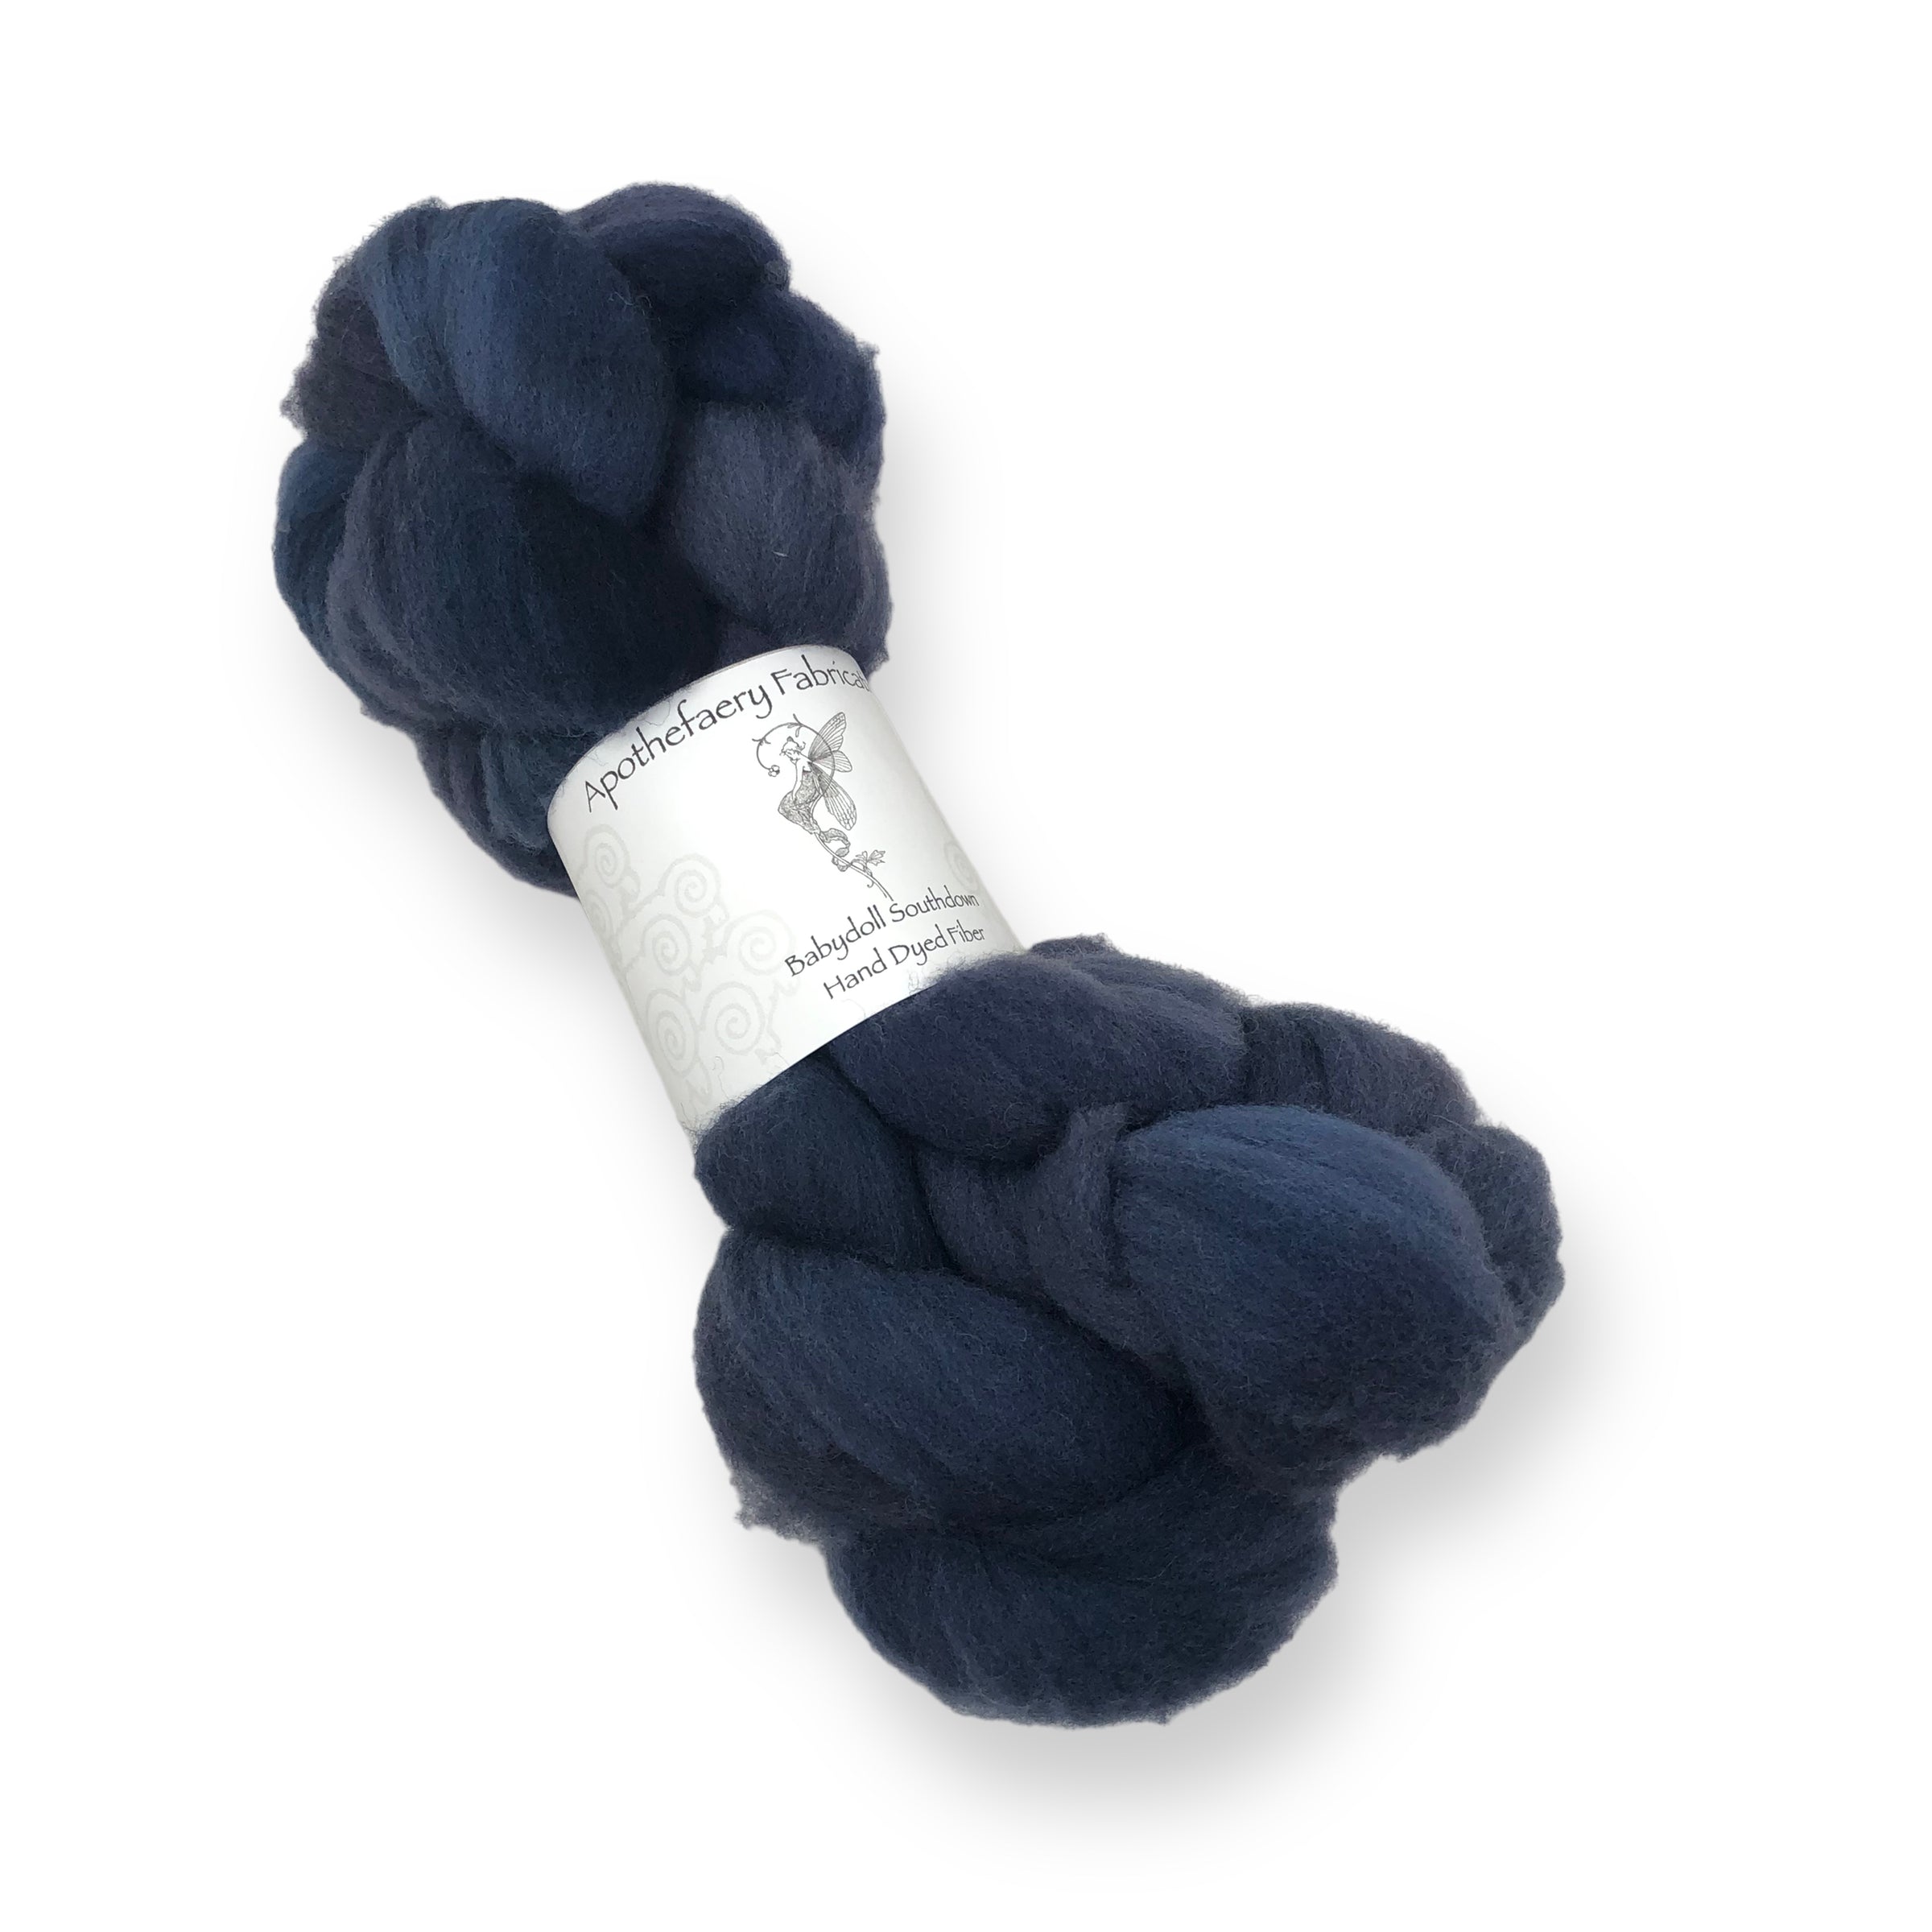 Thunderstorms - Babydoll Southdown wool